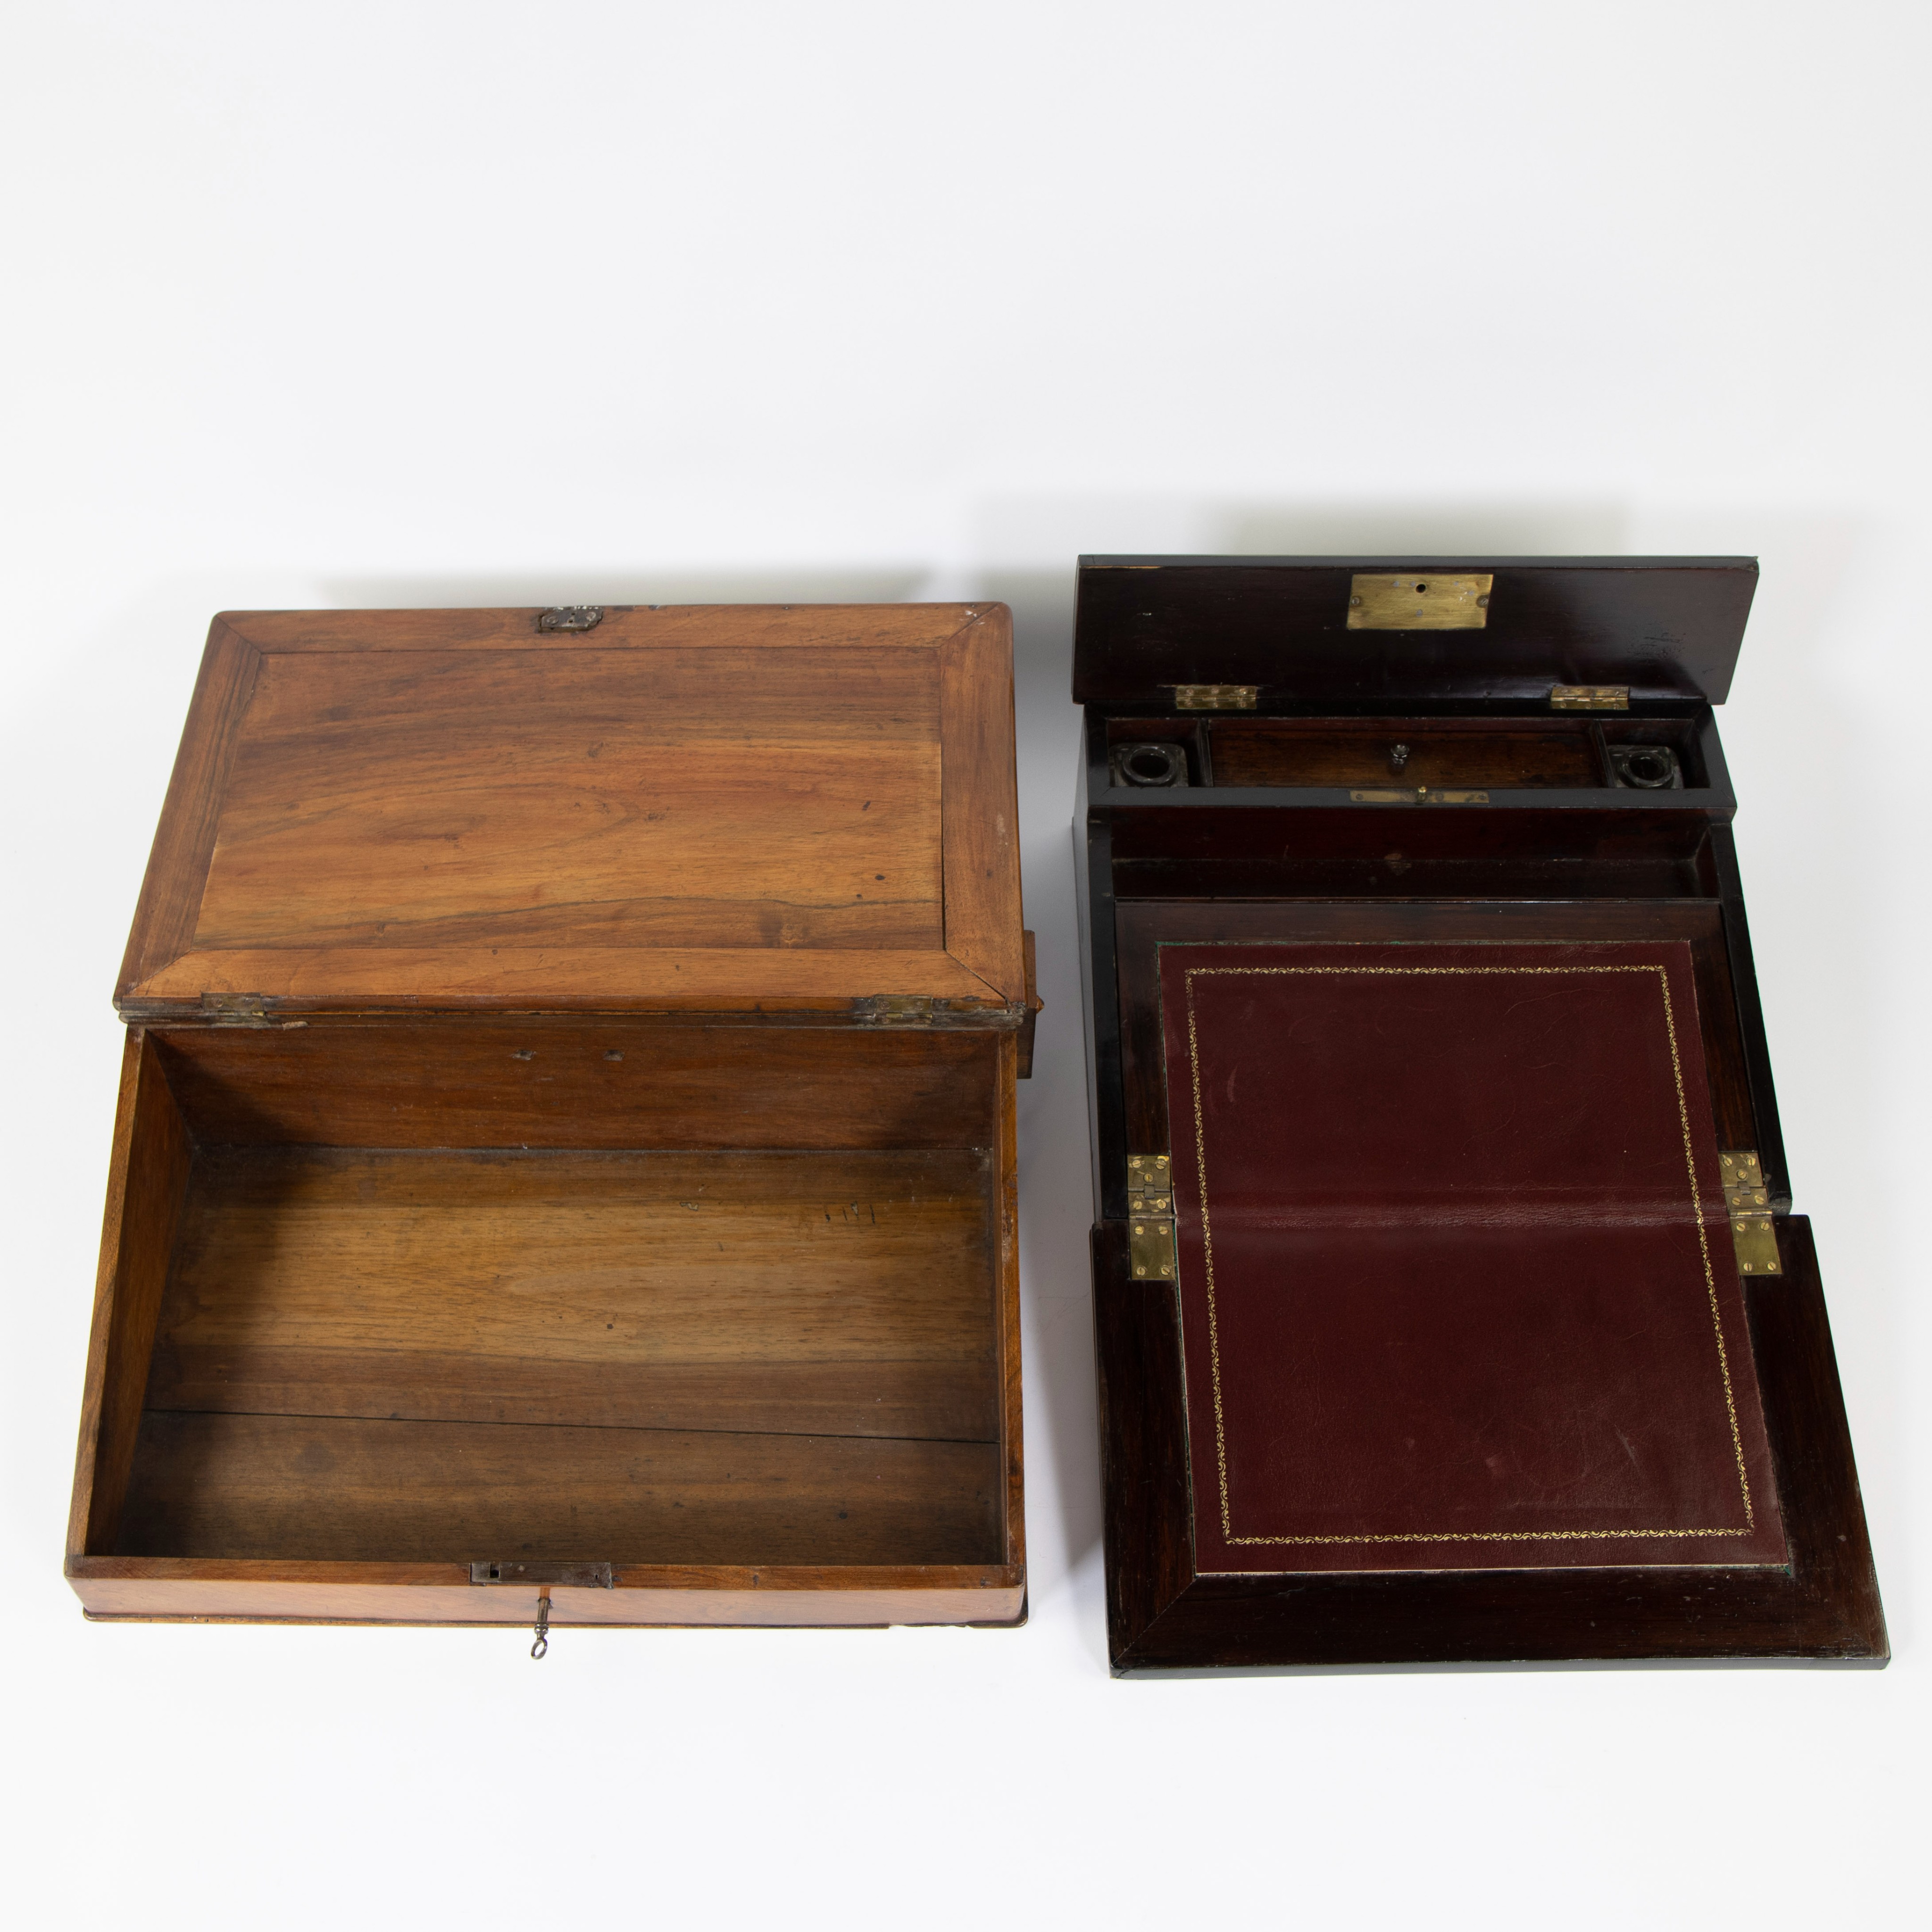 Lot of 2 19th century writing boxes, one Napoleon III inlaid with copper - Image 3 of 3